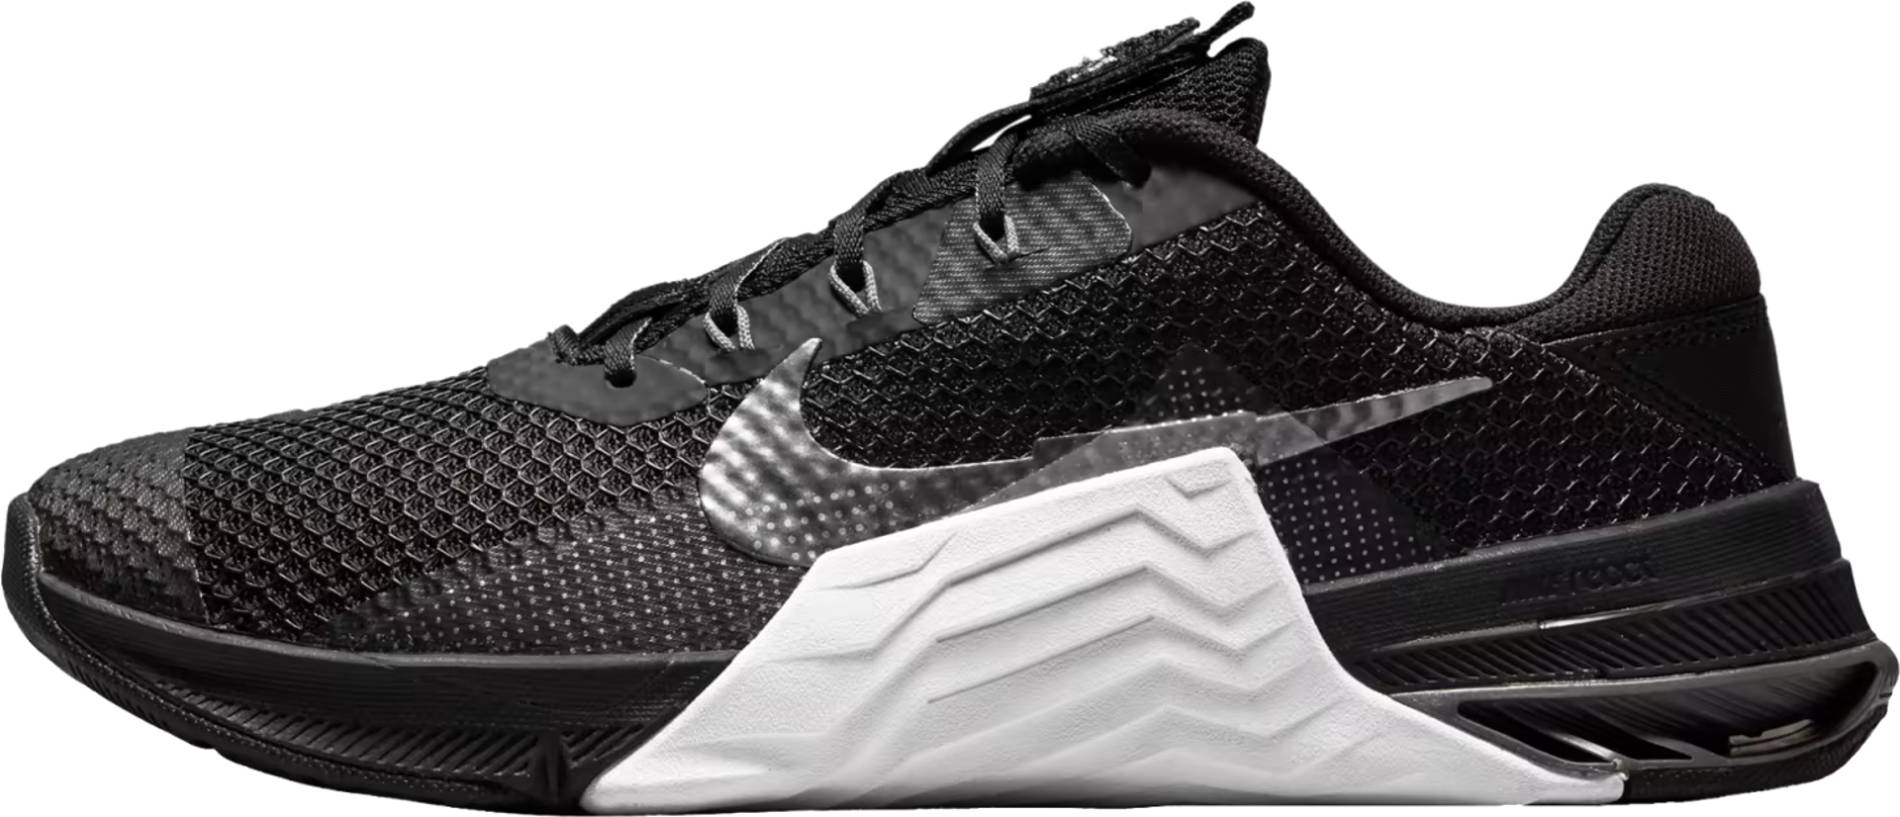 10+ Nike crossfit shoes: Save up to 39% | RunRepeat